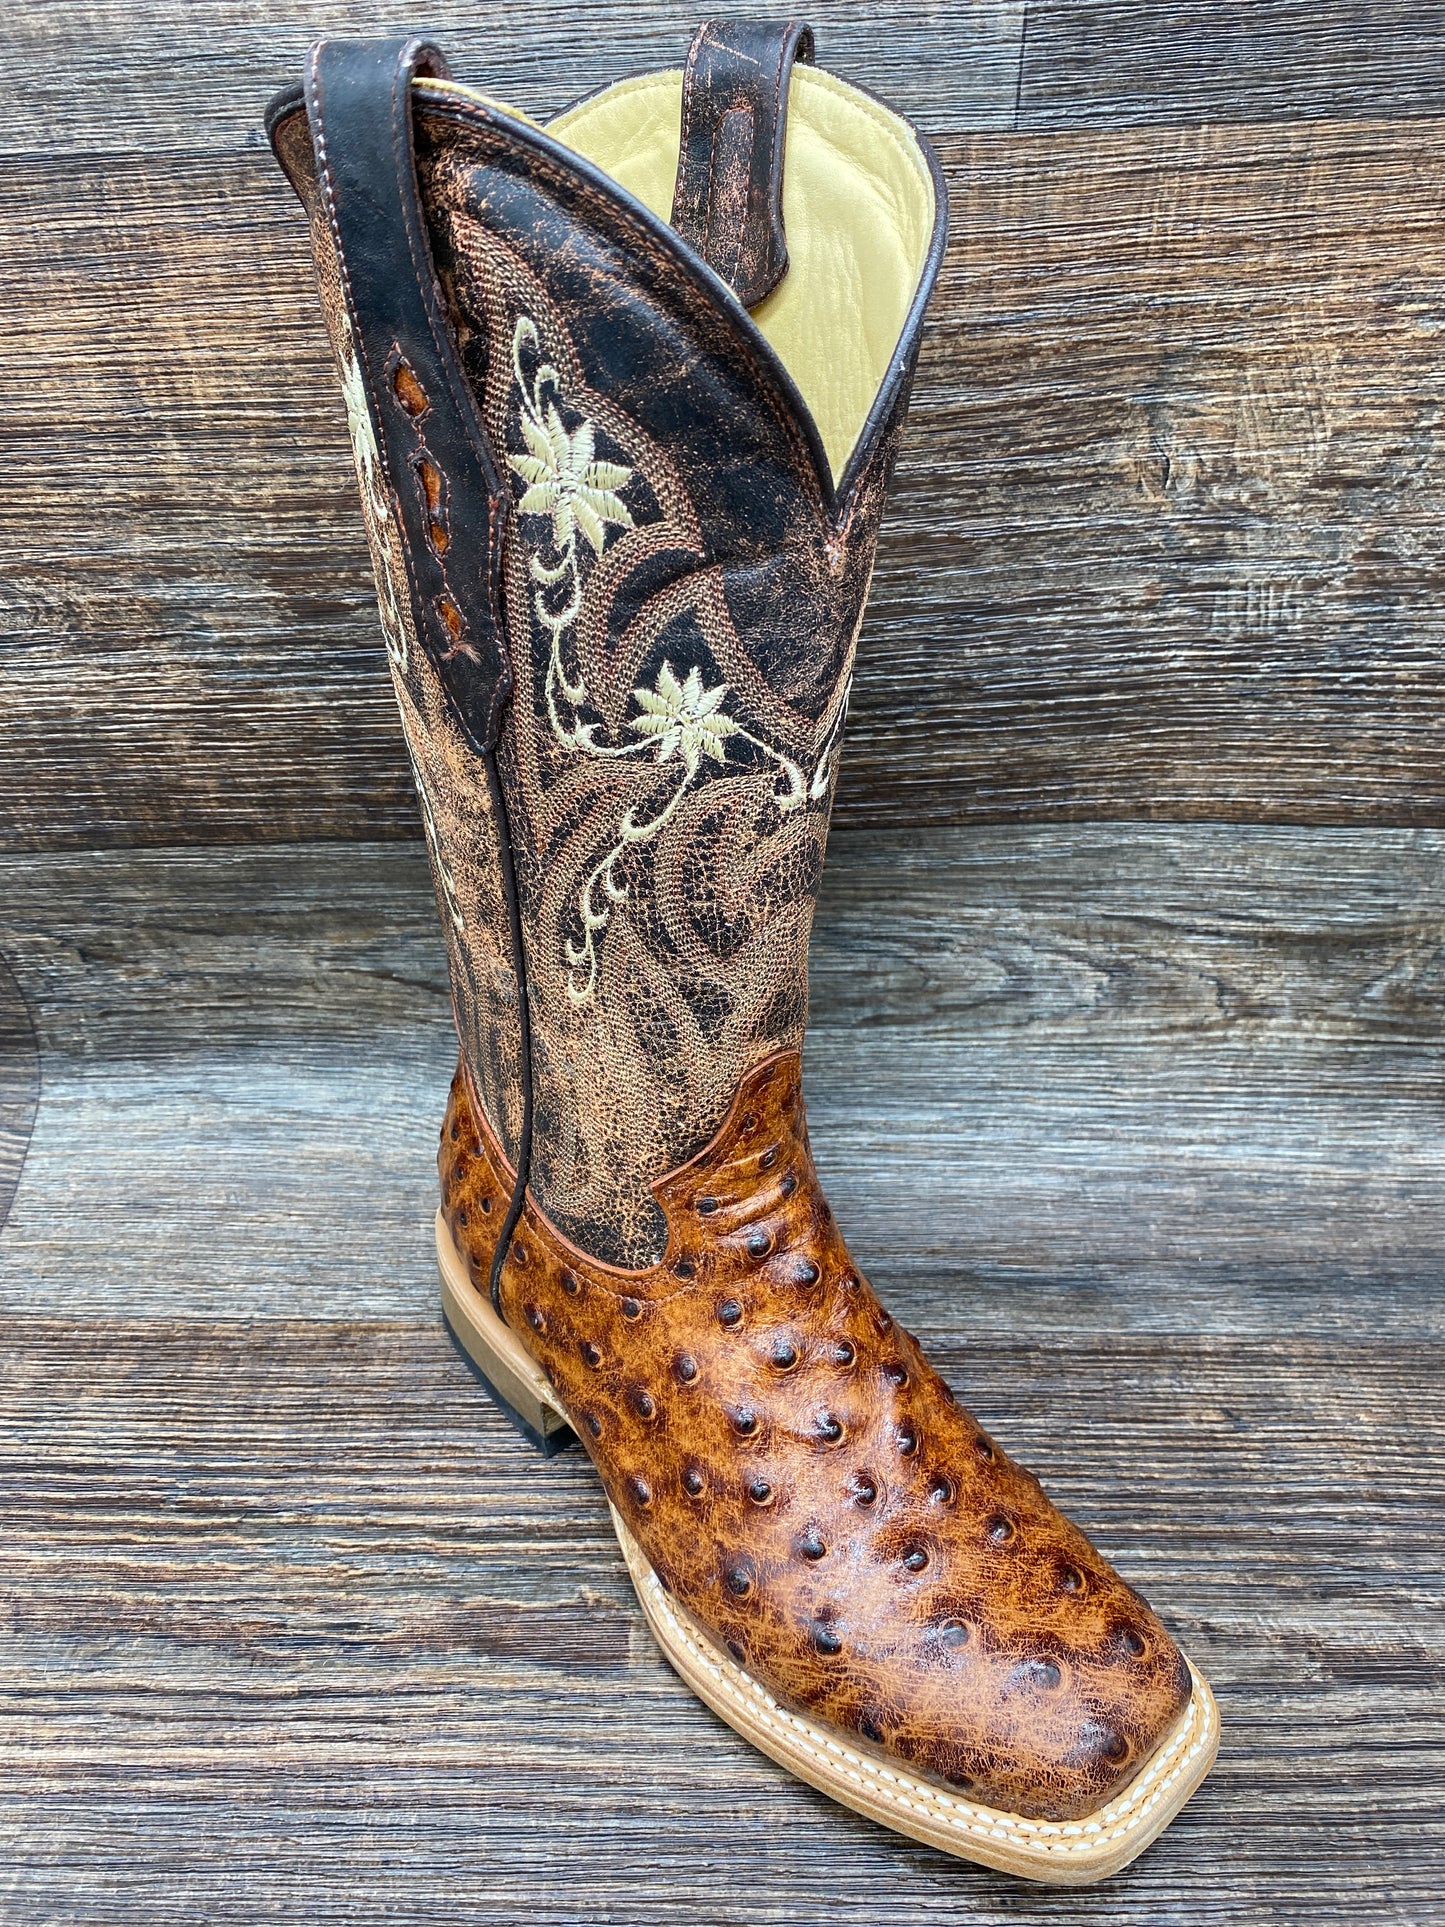 464q Women's Cognac Full Quill Print Square Toe Western Boot by Cowtown